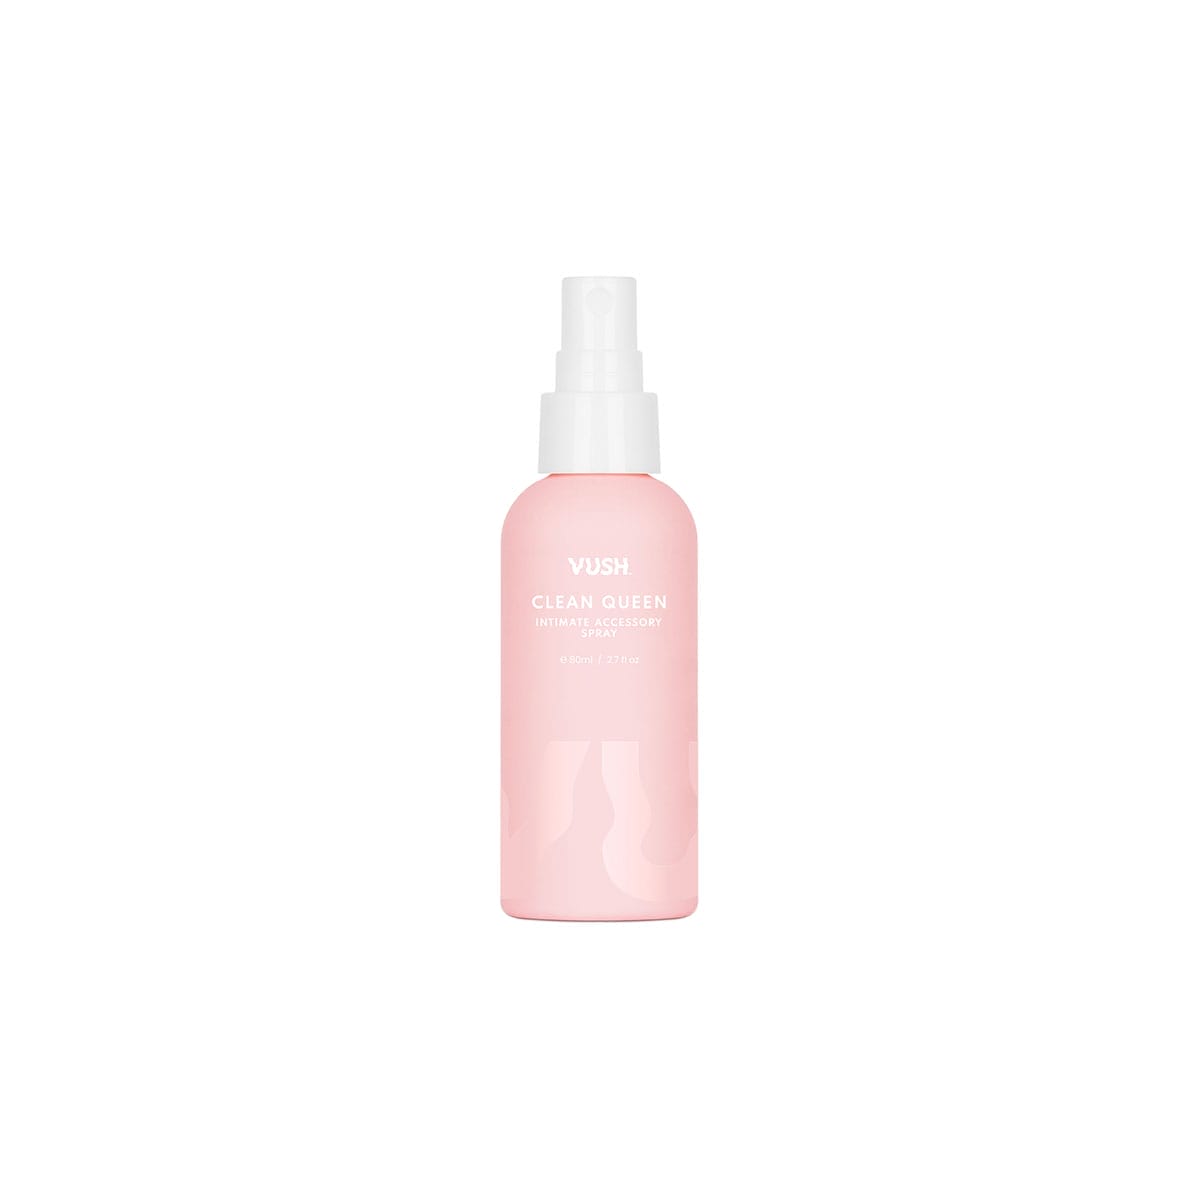 Buy VUSH Clean Queen Intimate Accessory Spray 80ml toy cleaner for her.